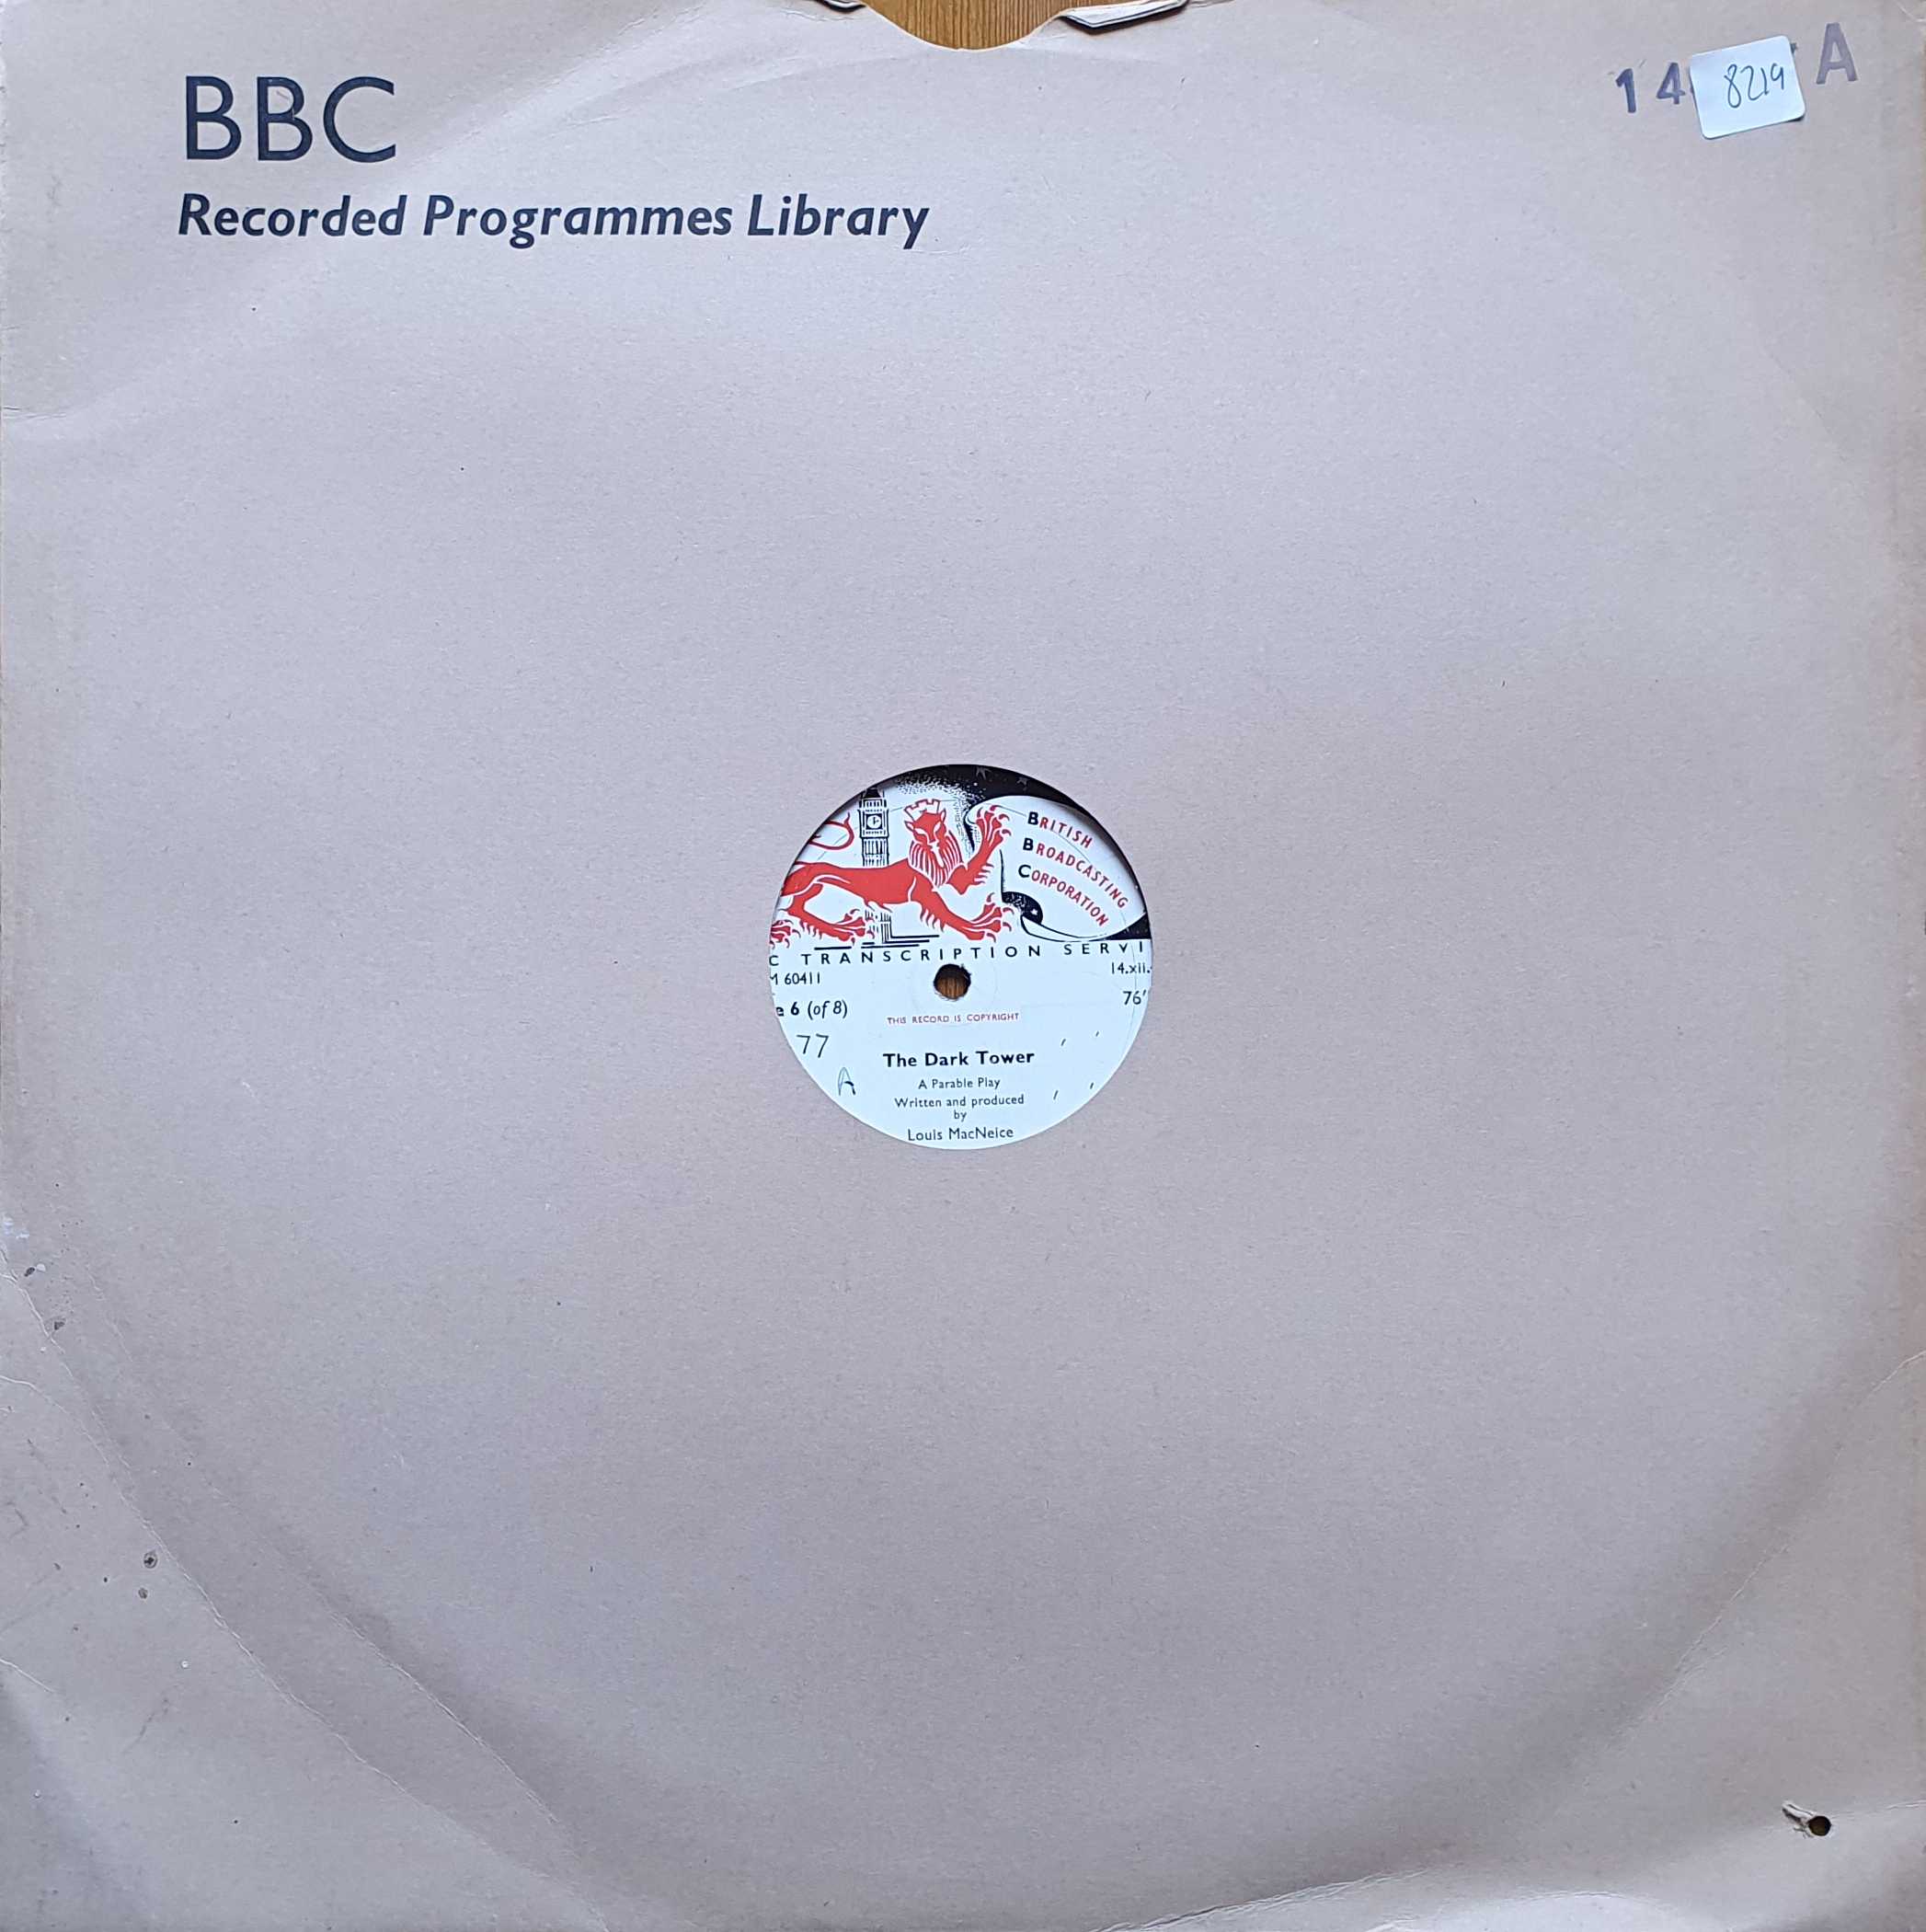 Picture of 16PM 60411 The dark tower - Parts 6 & 8 by artist Louis MacNeice from the BBC 16inches - Records and Tapes library